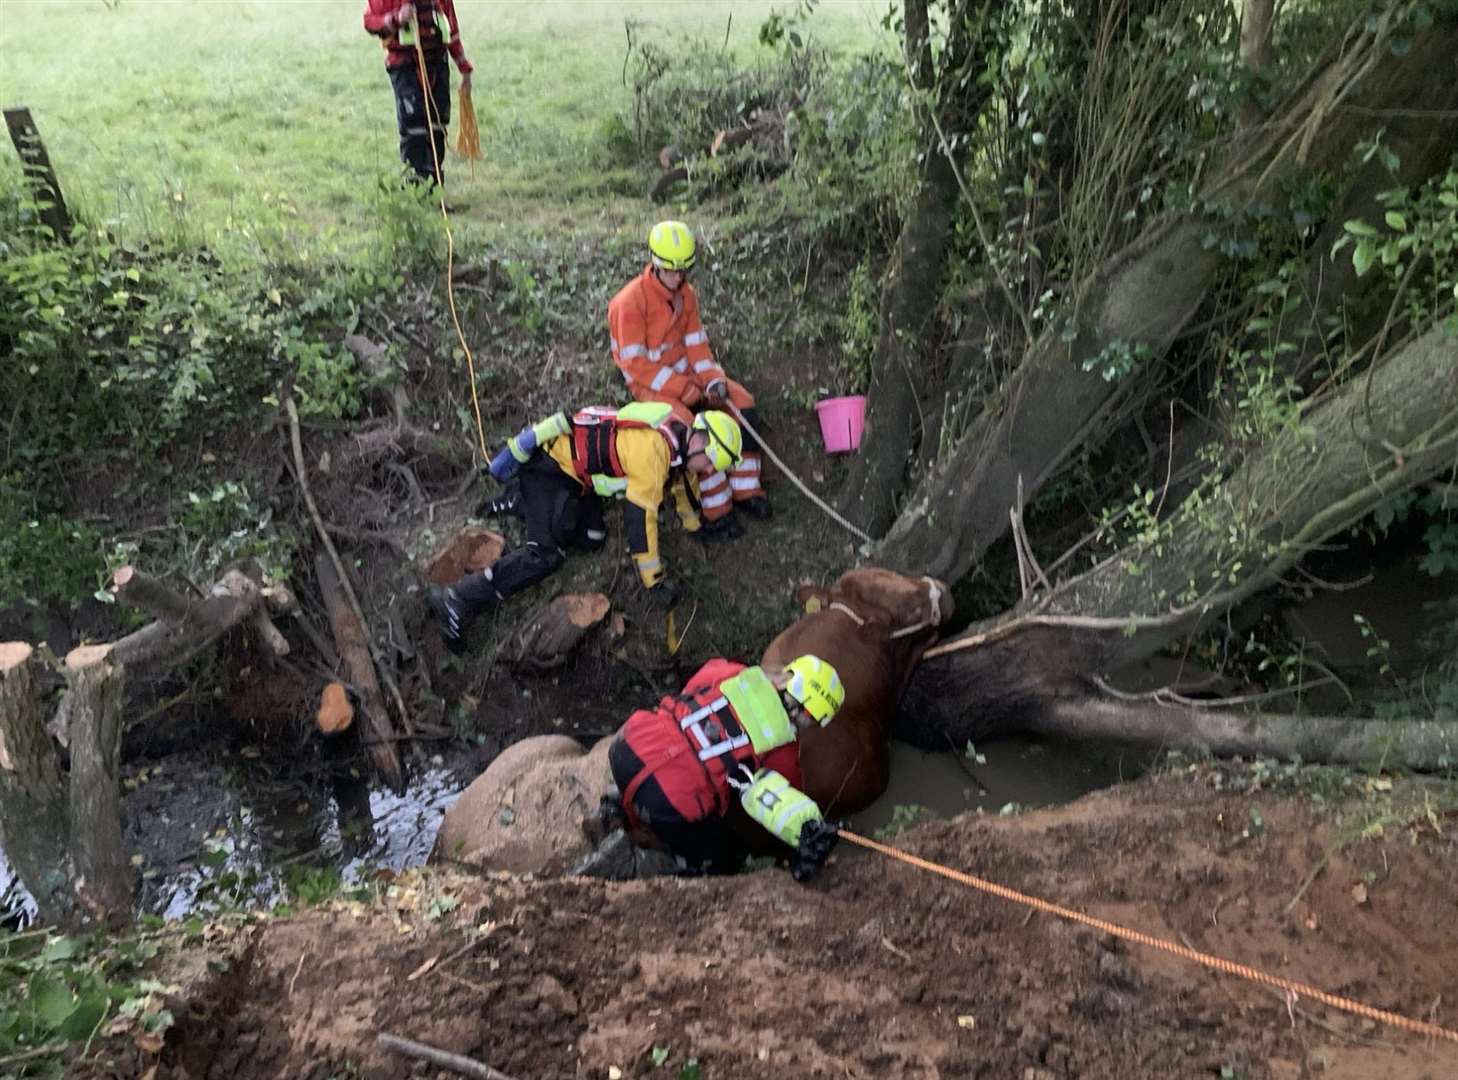 Notorious the bull was rescued by fire crews in Tonbridge. Picture: Kent Fire and Rescue Service/X